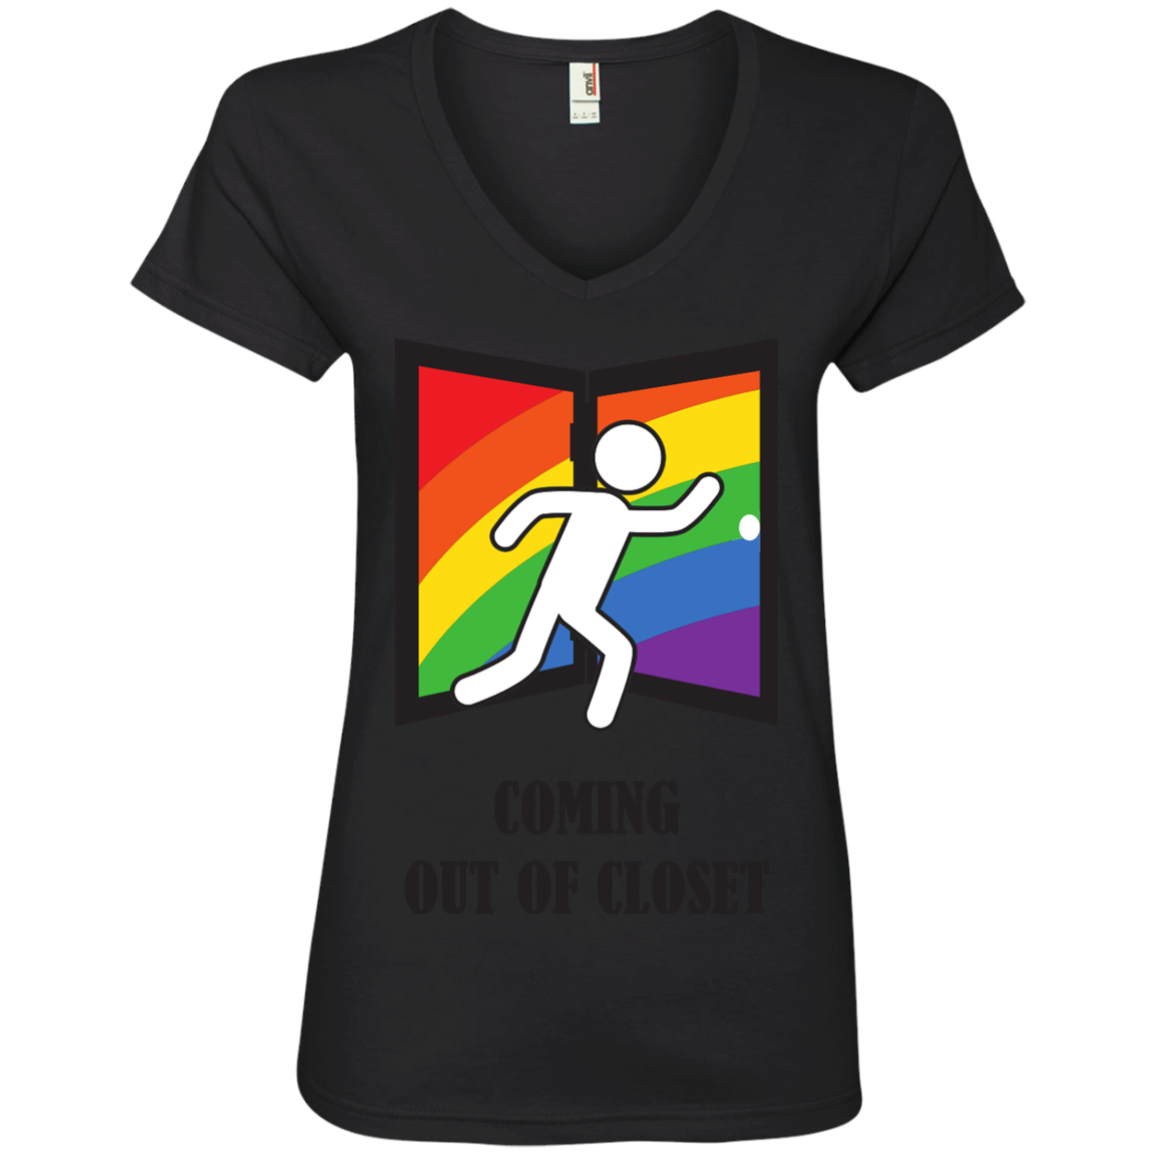 "National Coming Out Day" Special Shirt - Coming out of Closet